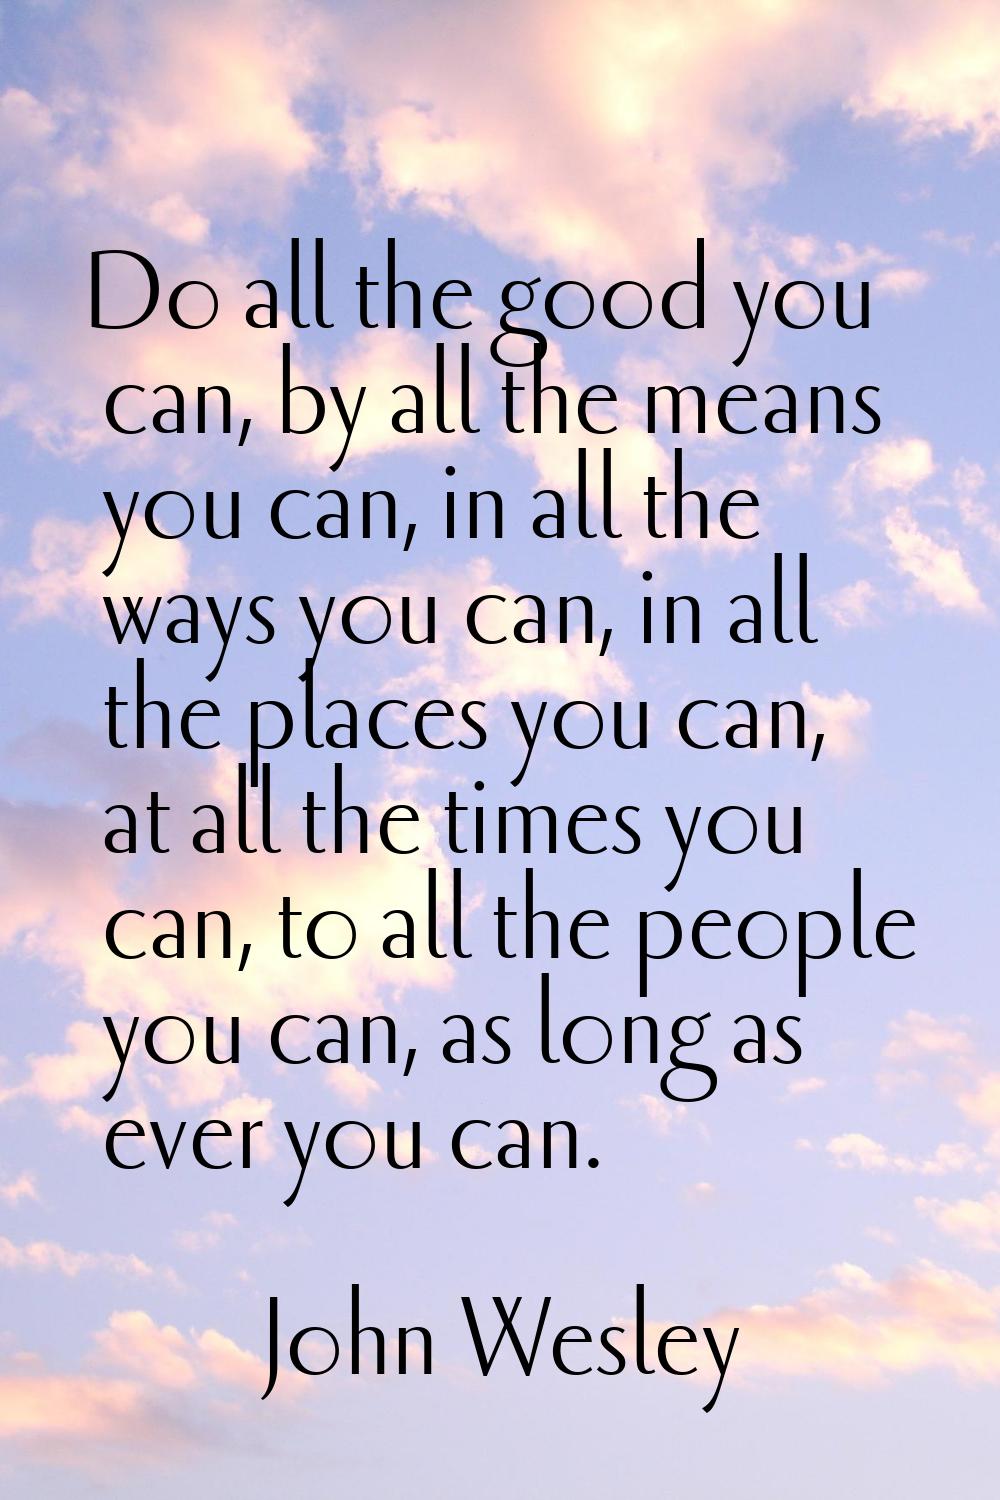 Do all the good you can, by all the means you can, in all the ways you can, in all the places you c